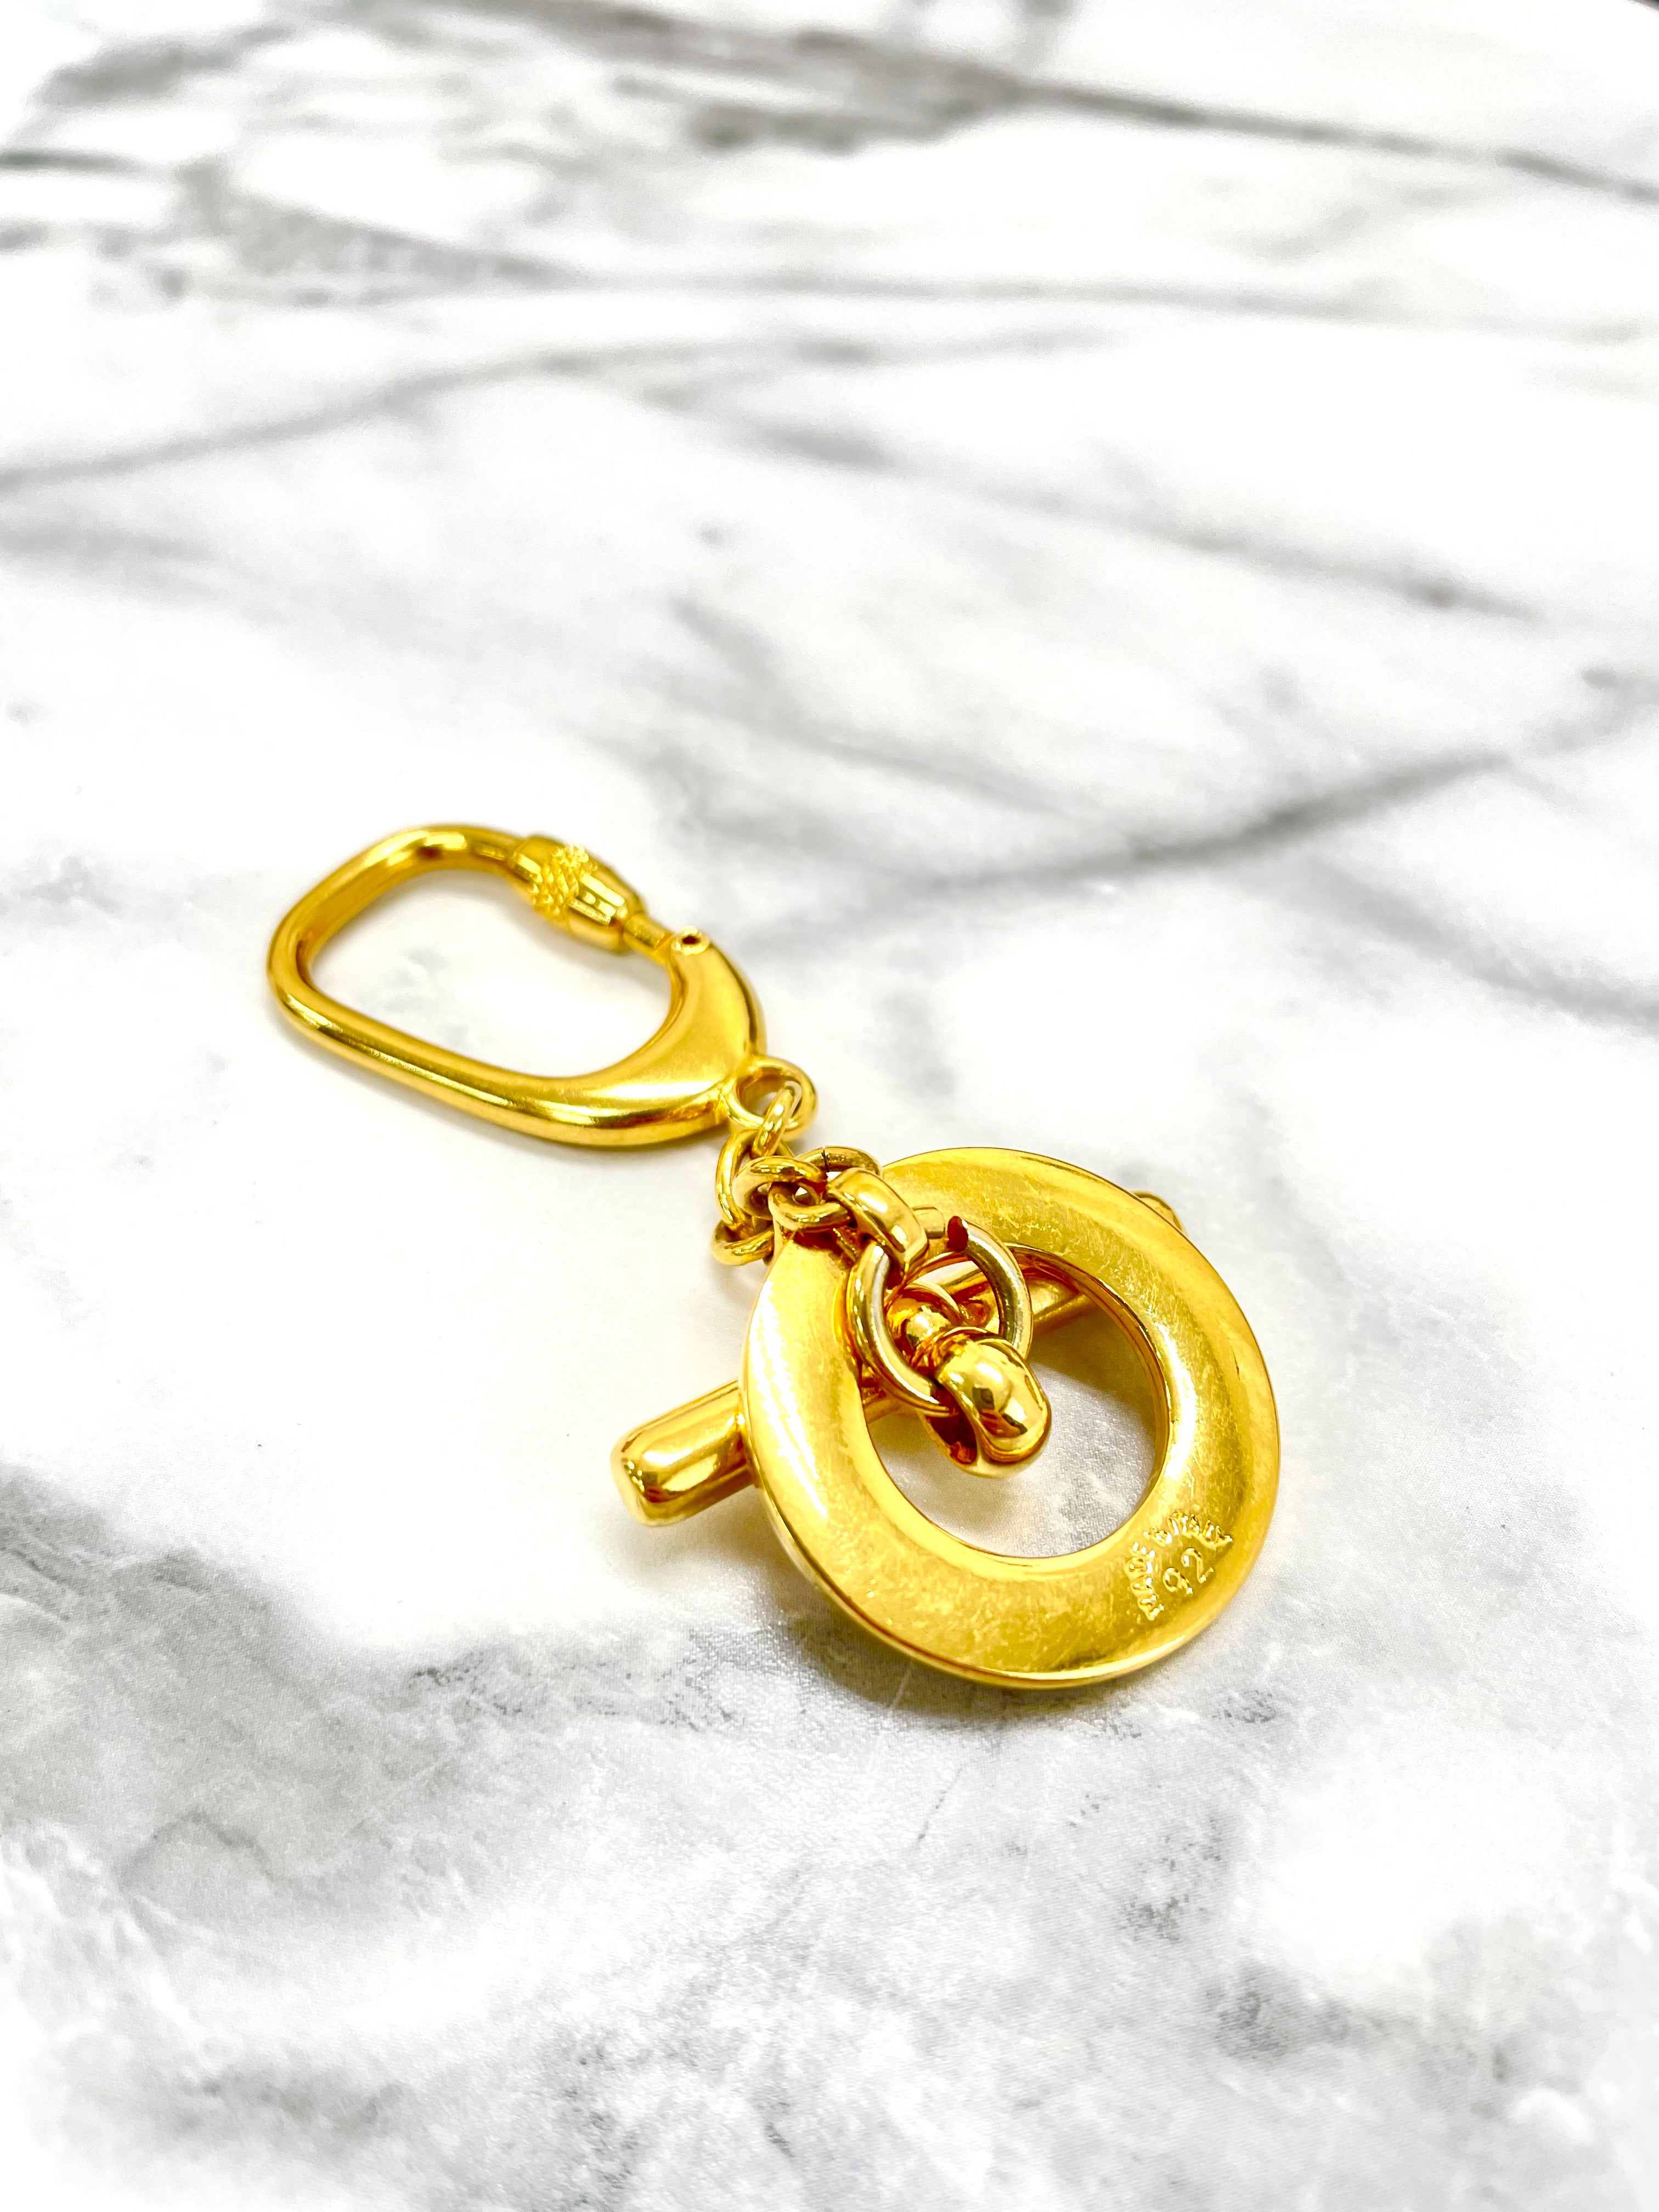 CELINE Toggle chain key ring gold vintage old accessories evfspx